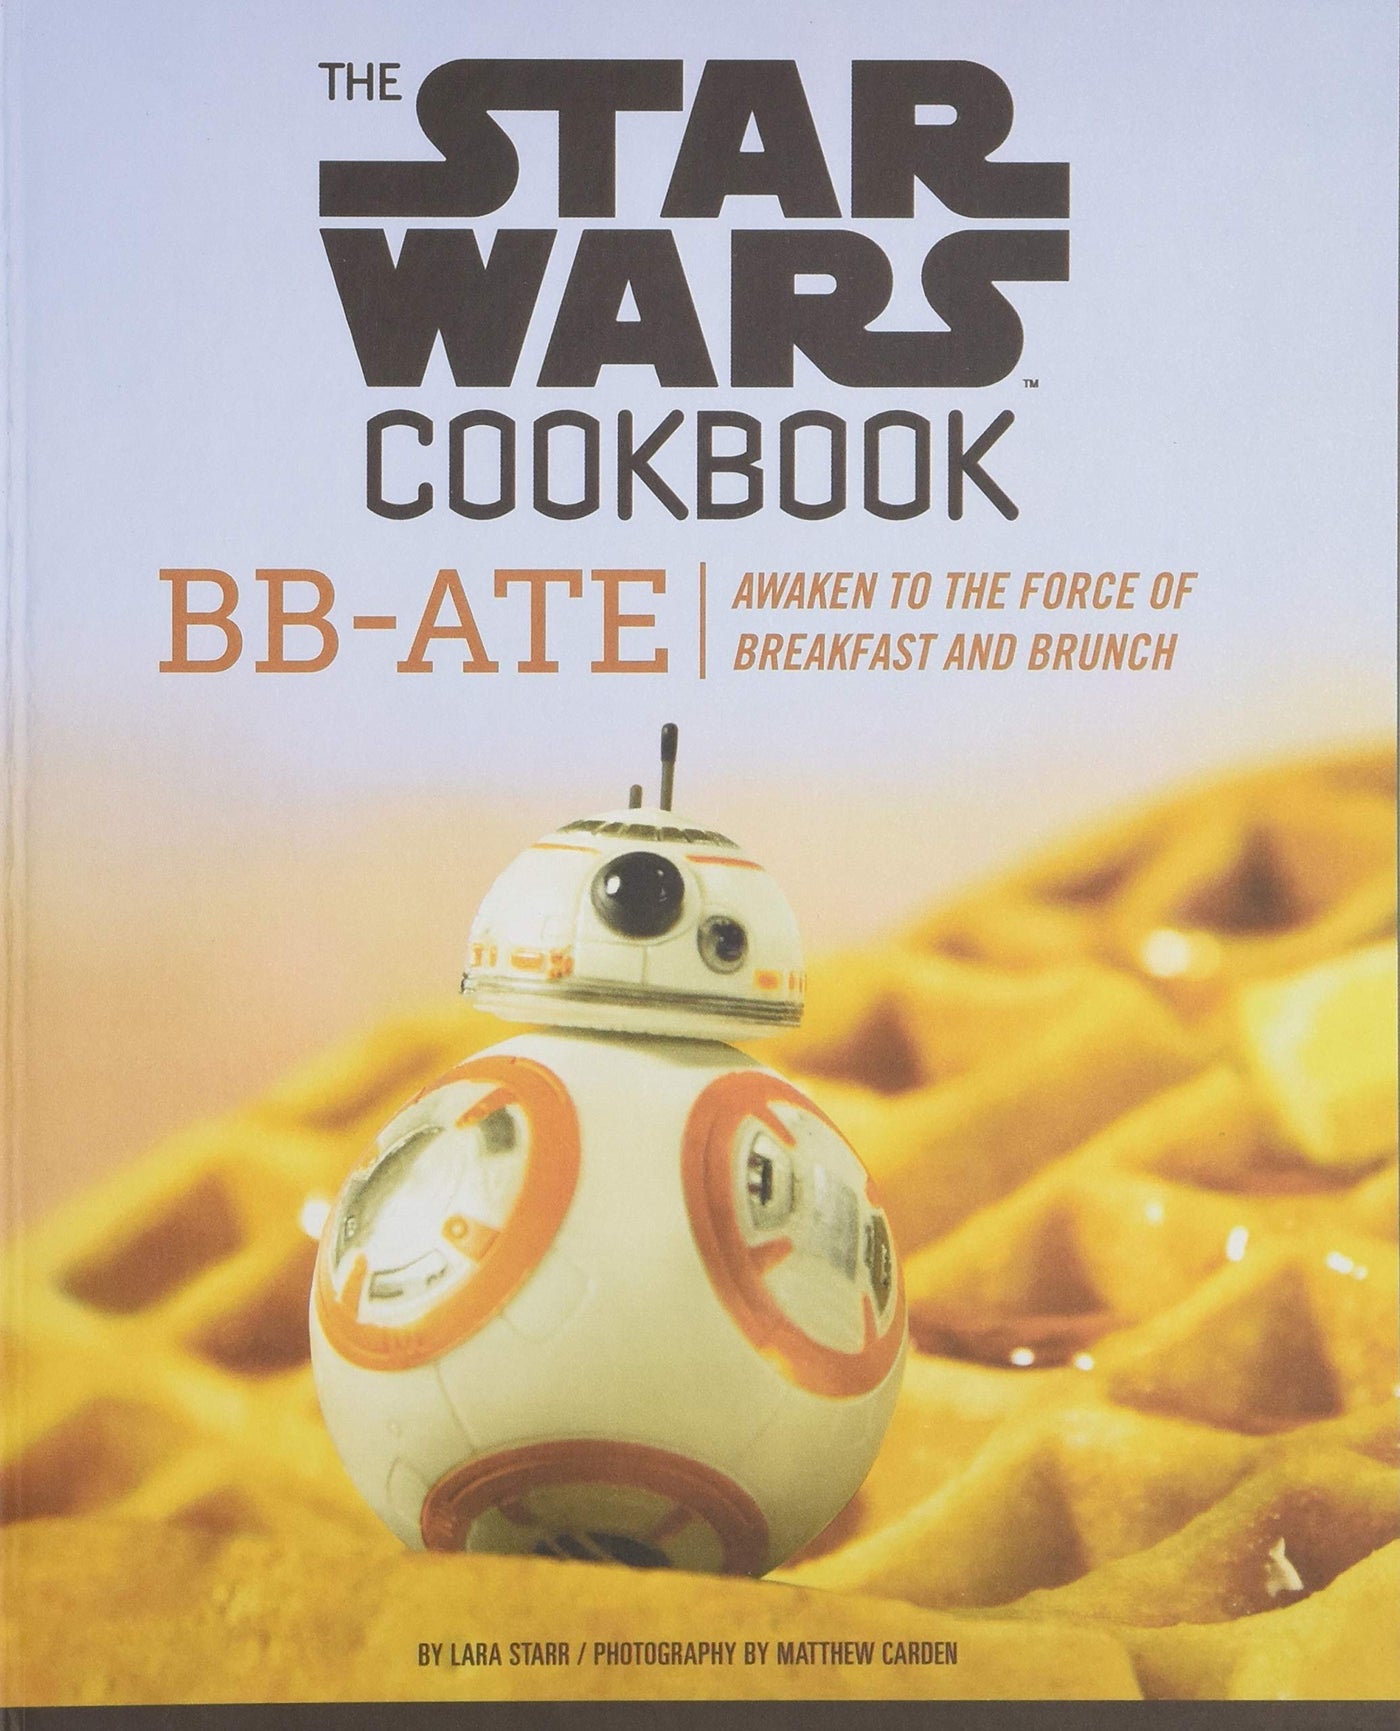 Disney BB-Ate Awaken to the Force of Breakfast and Brunch Star Wars Cookbook New